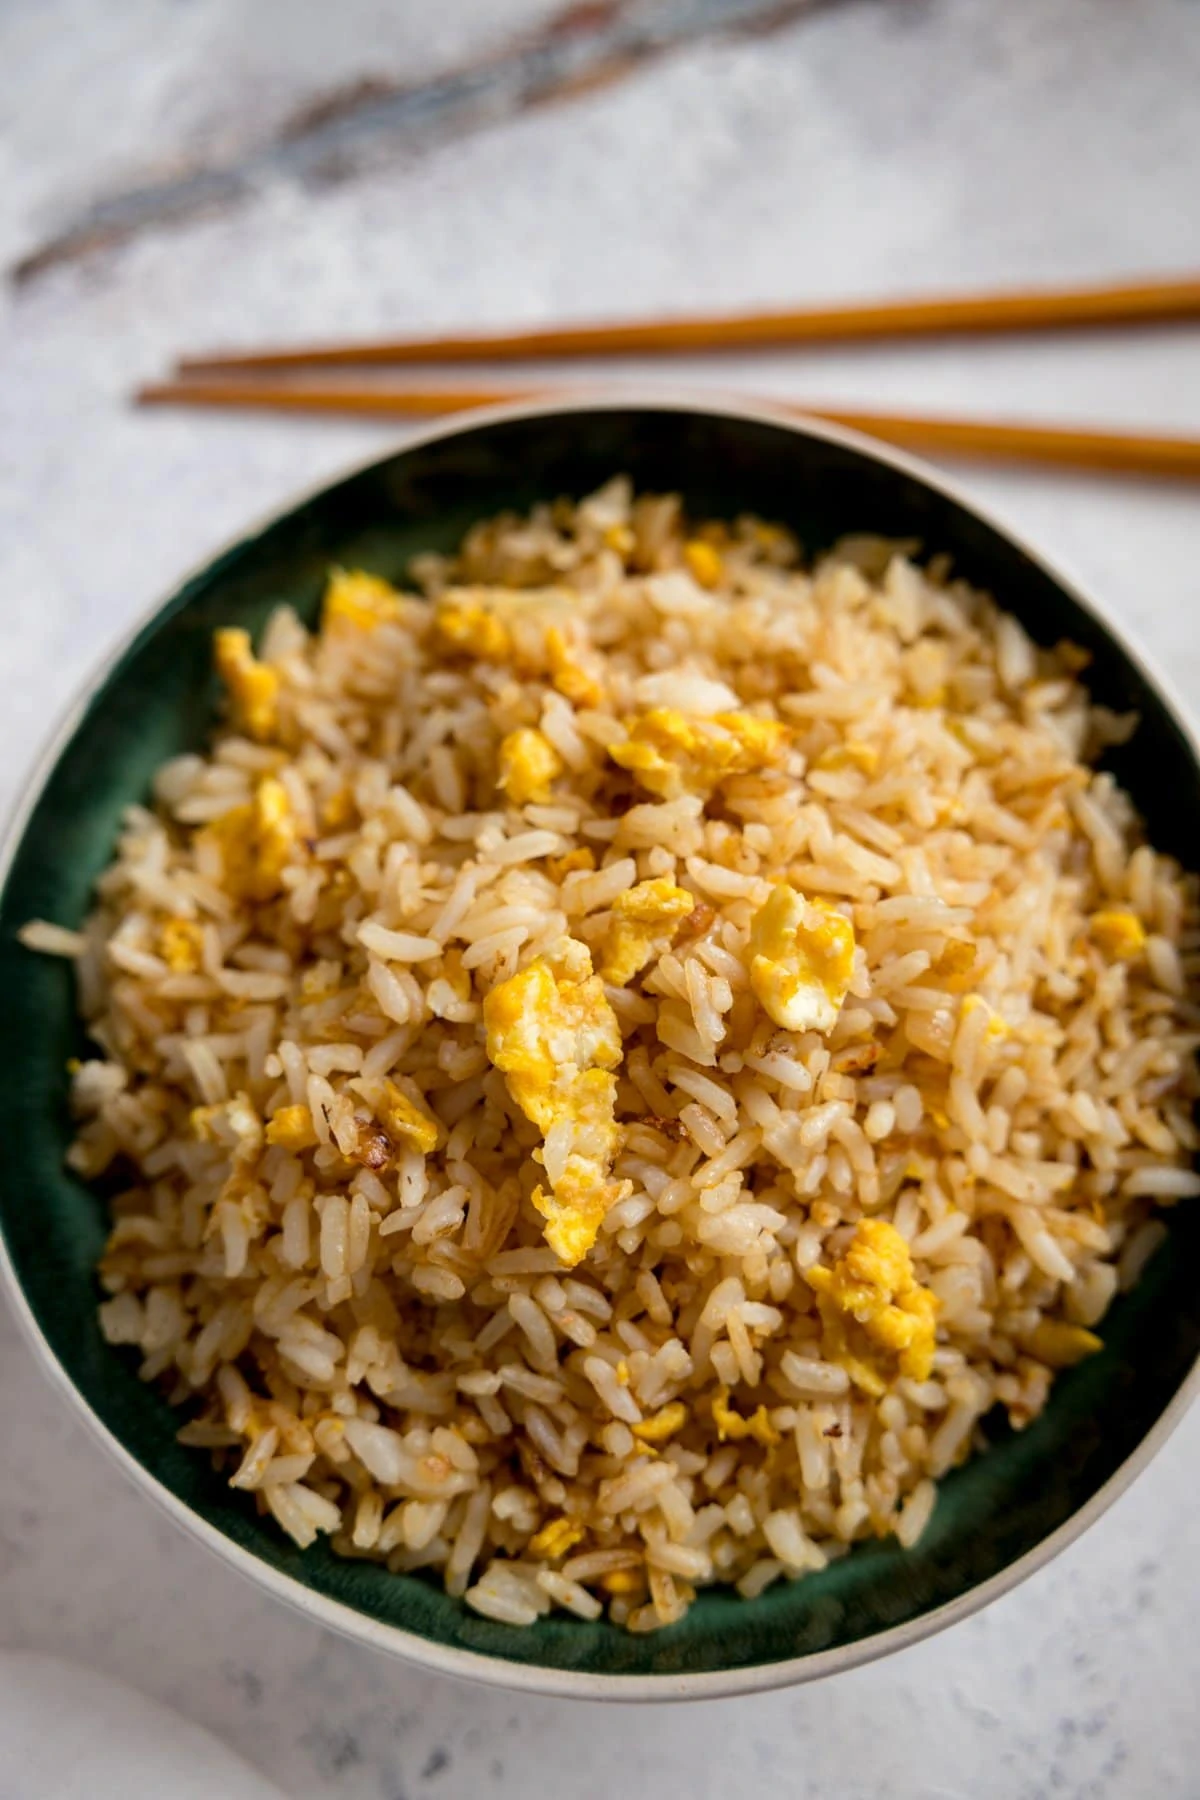 Asian Spice Mixes: Fried Rice and Stir Fry